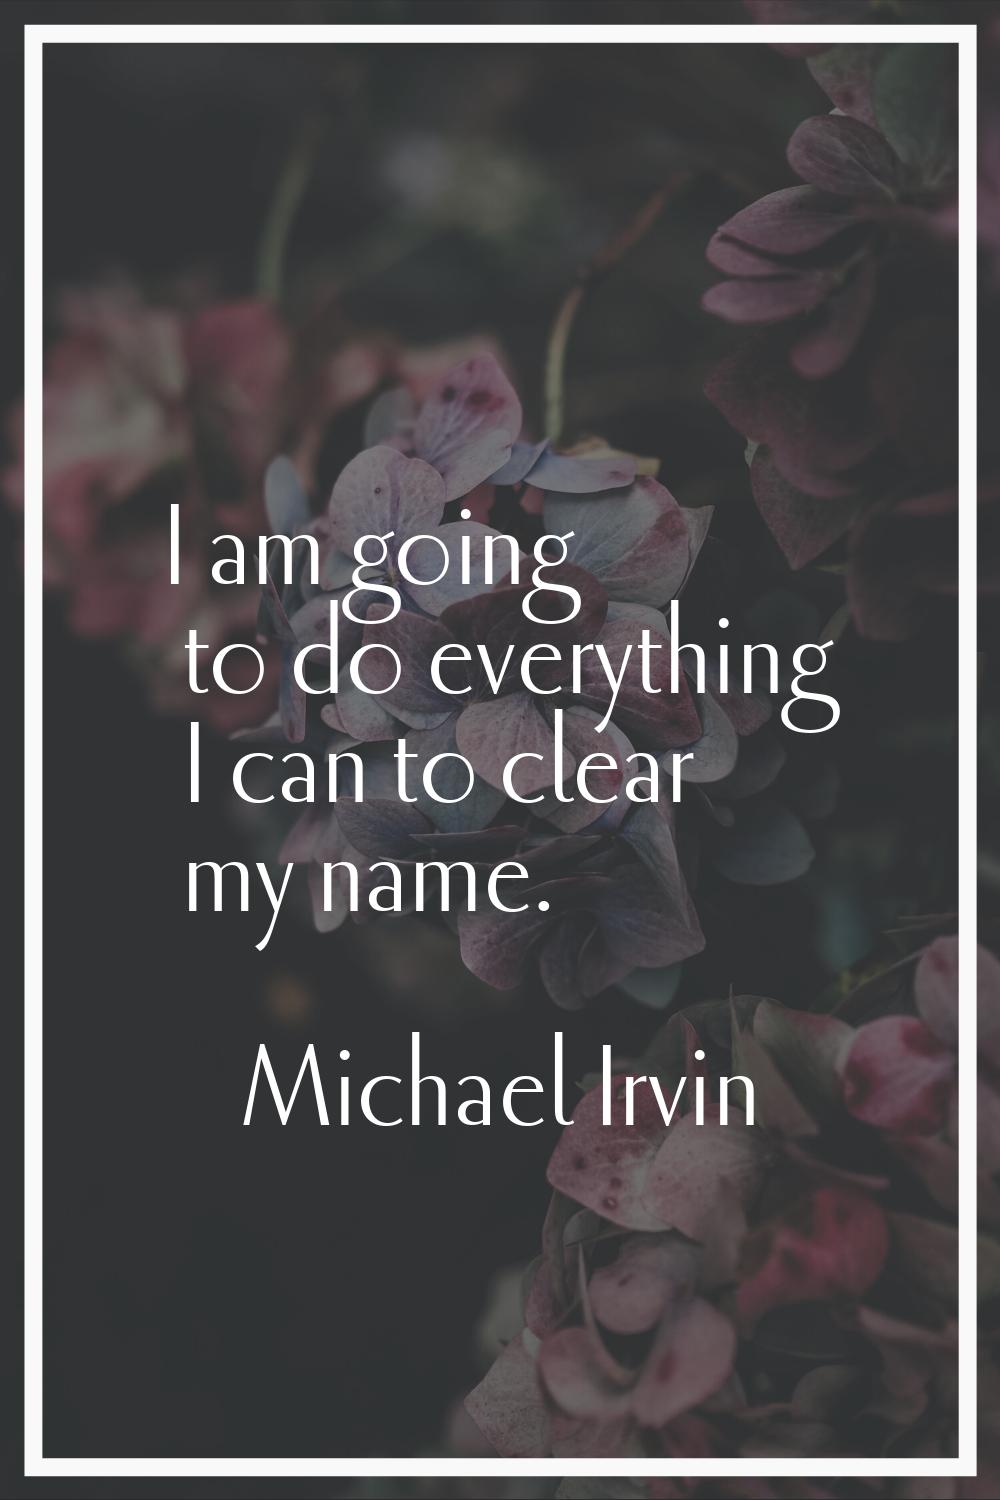 I am going to do everything I can to clear my name.